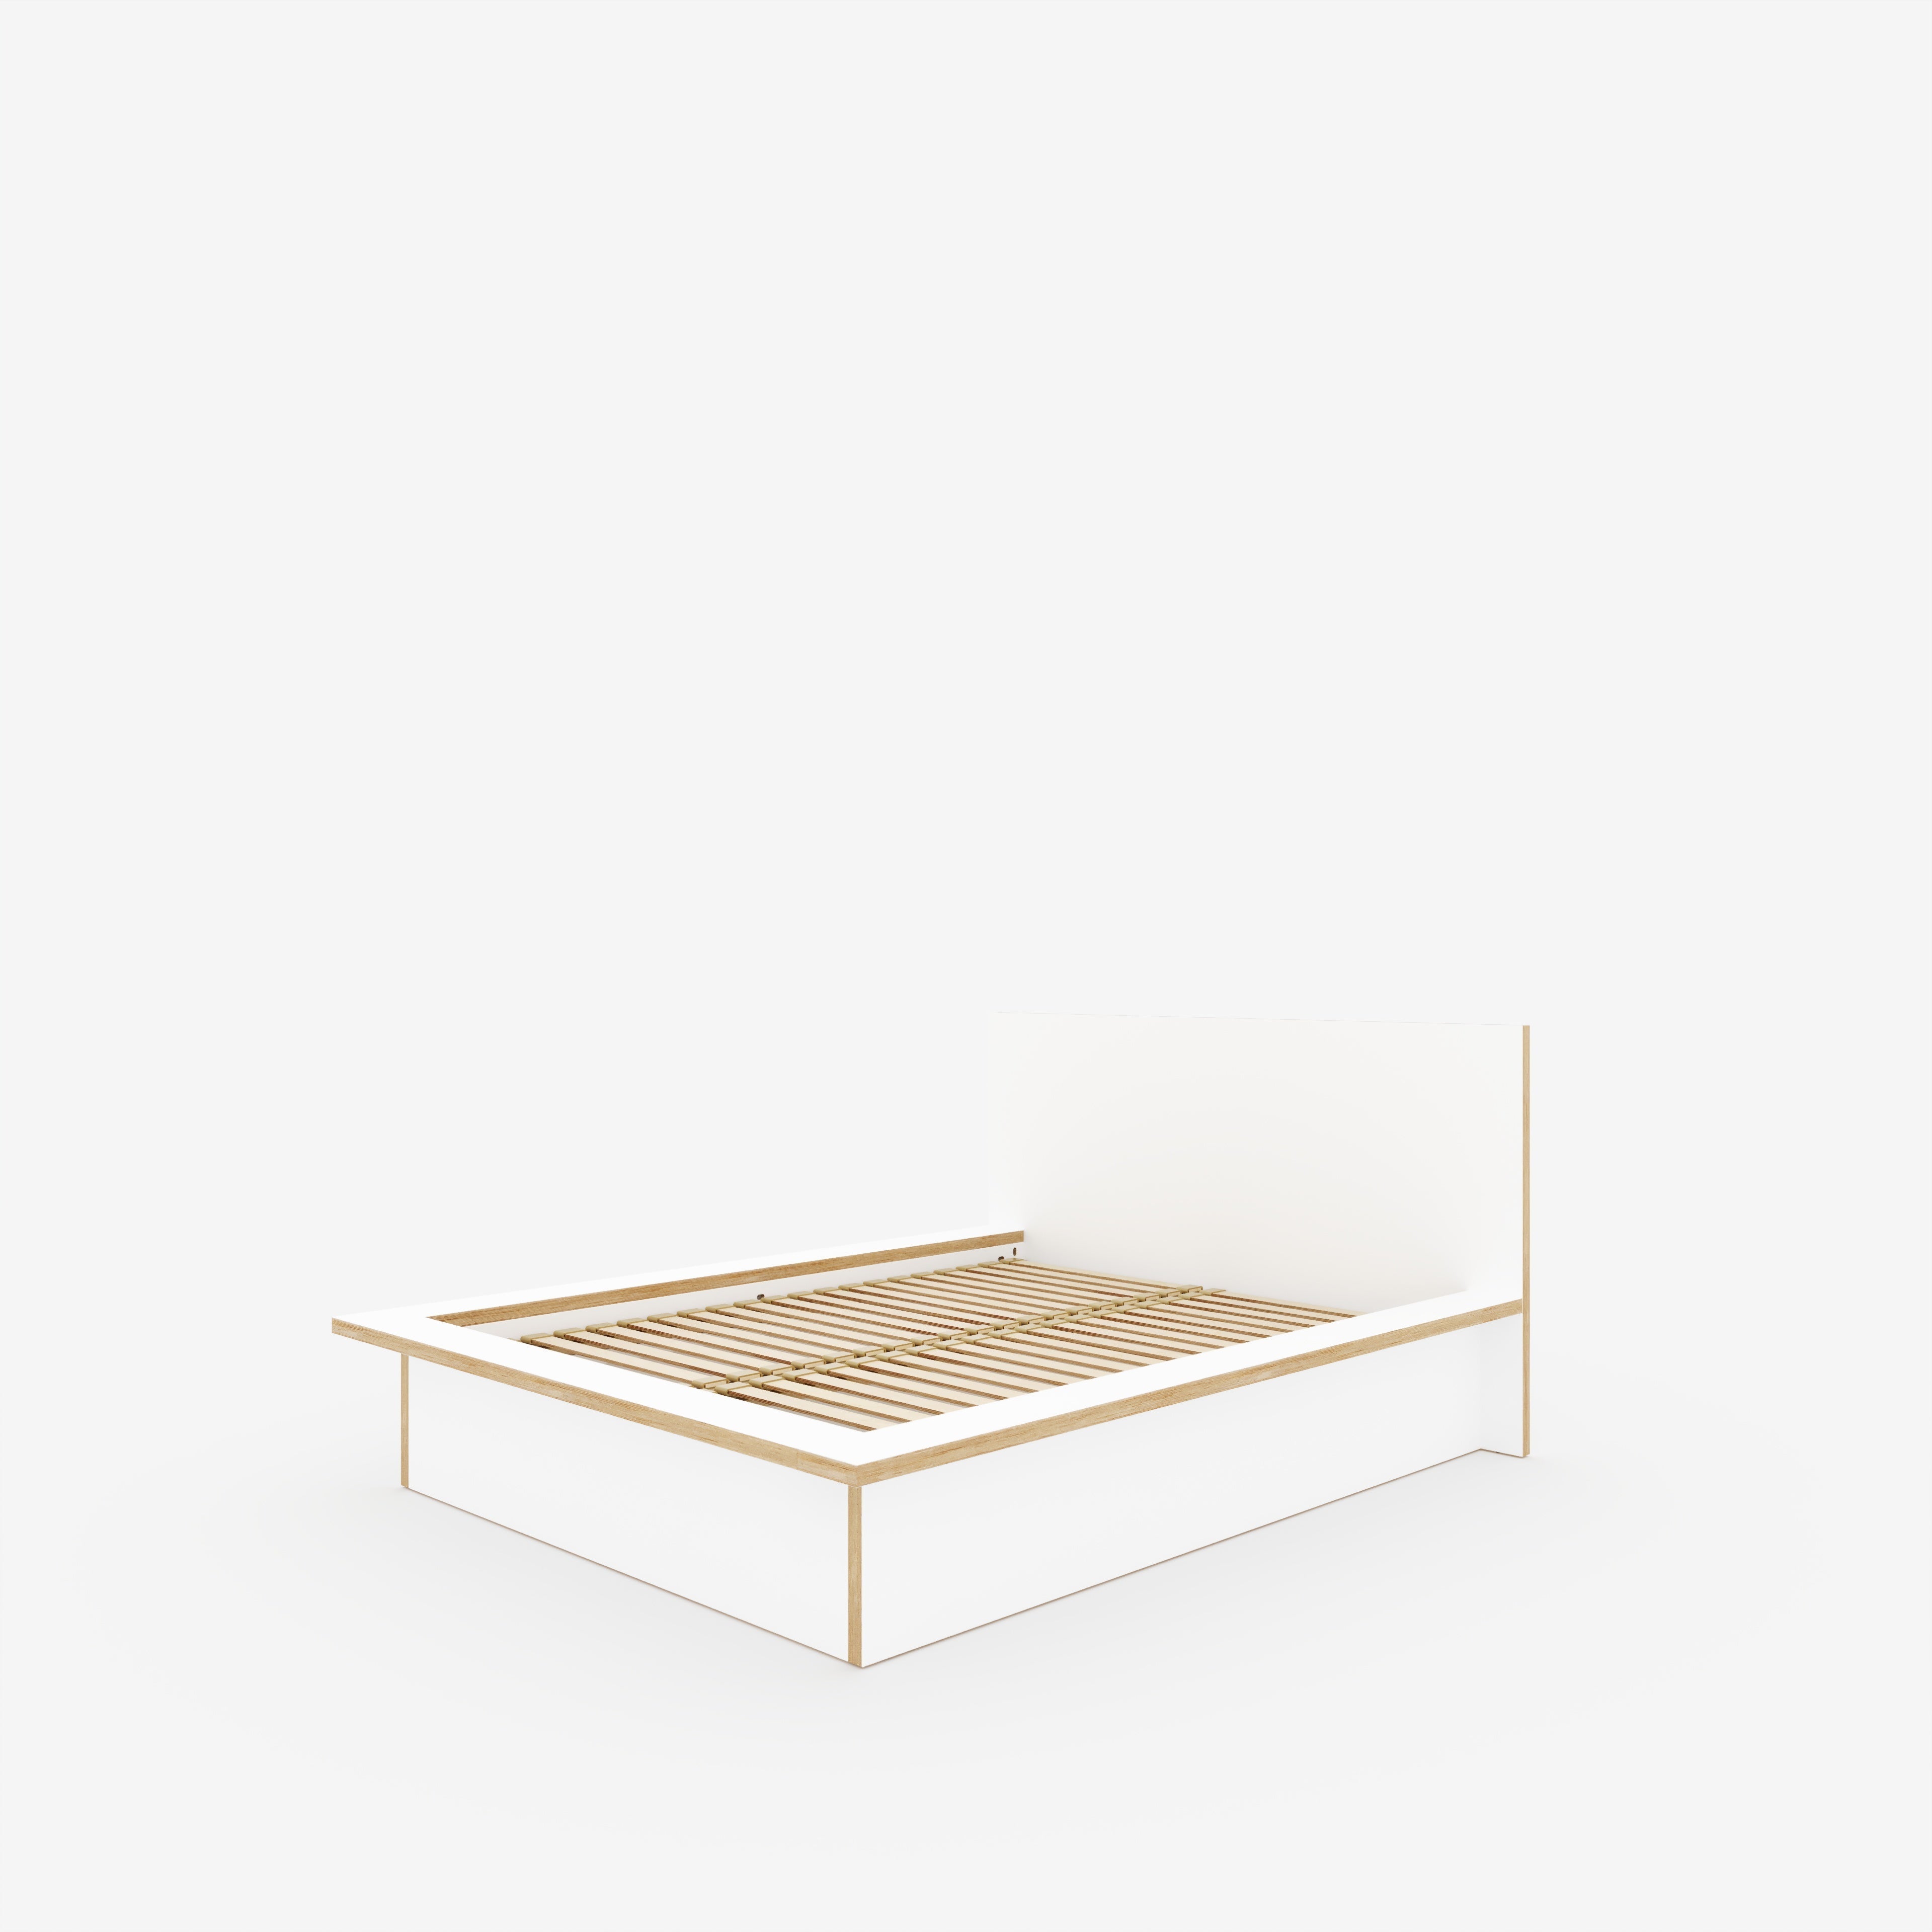 Plywood Platform Bed - Plywood Formica White - Standard King 1500(w) x 2000(d) High